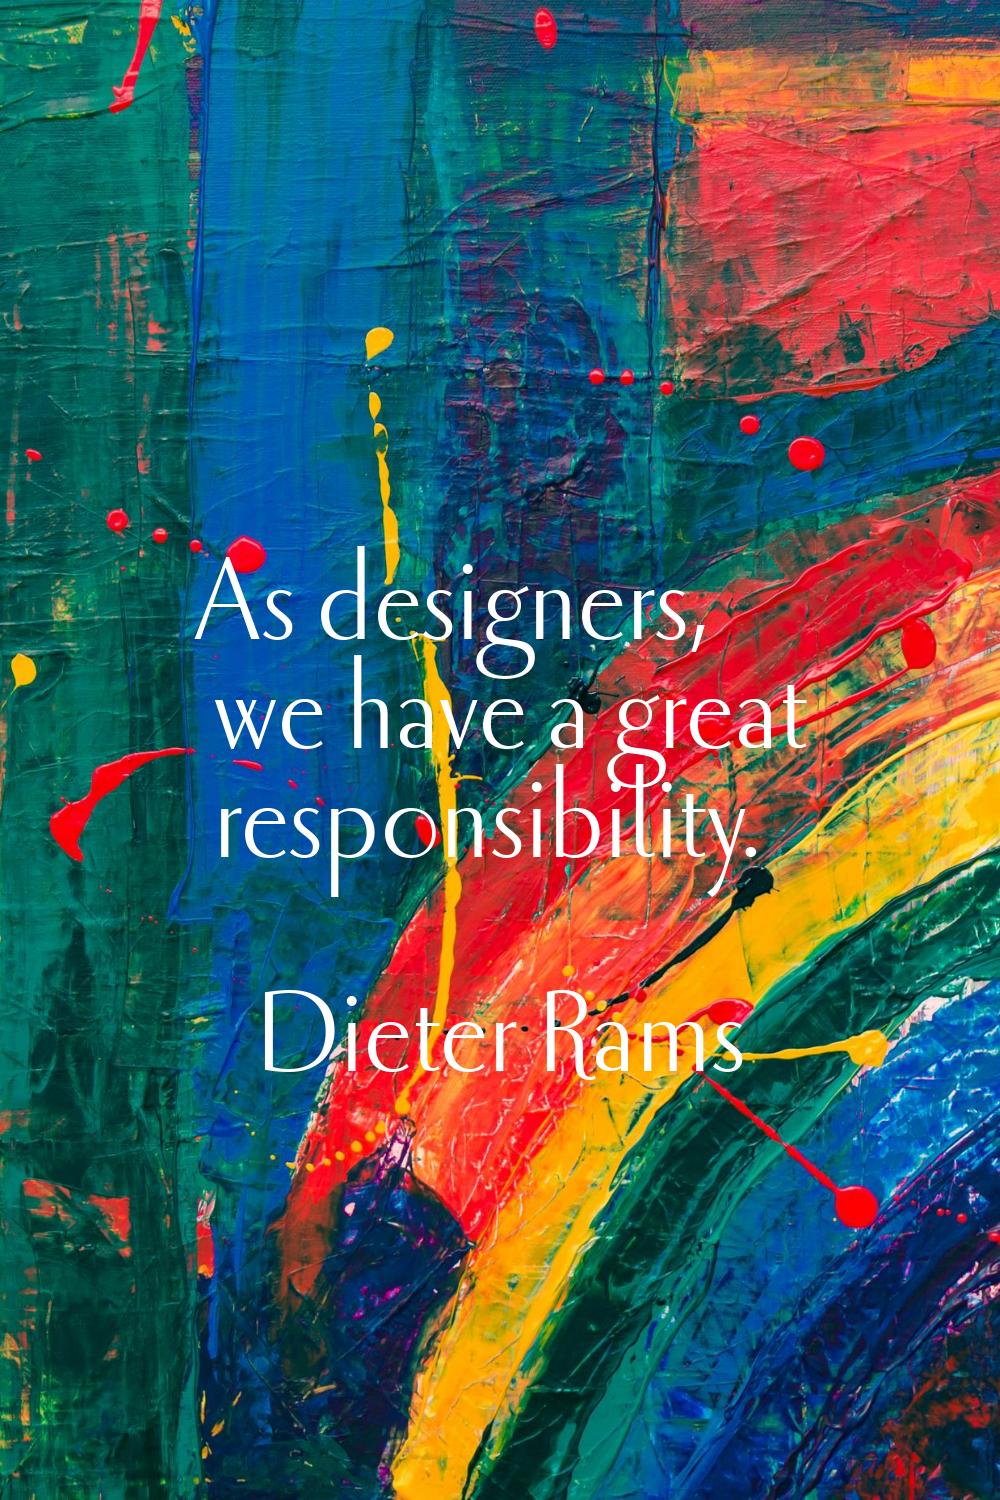 As designers, we have a great responsibility.